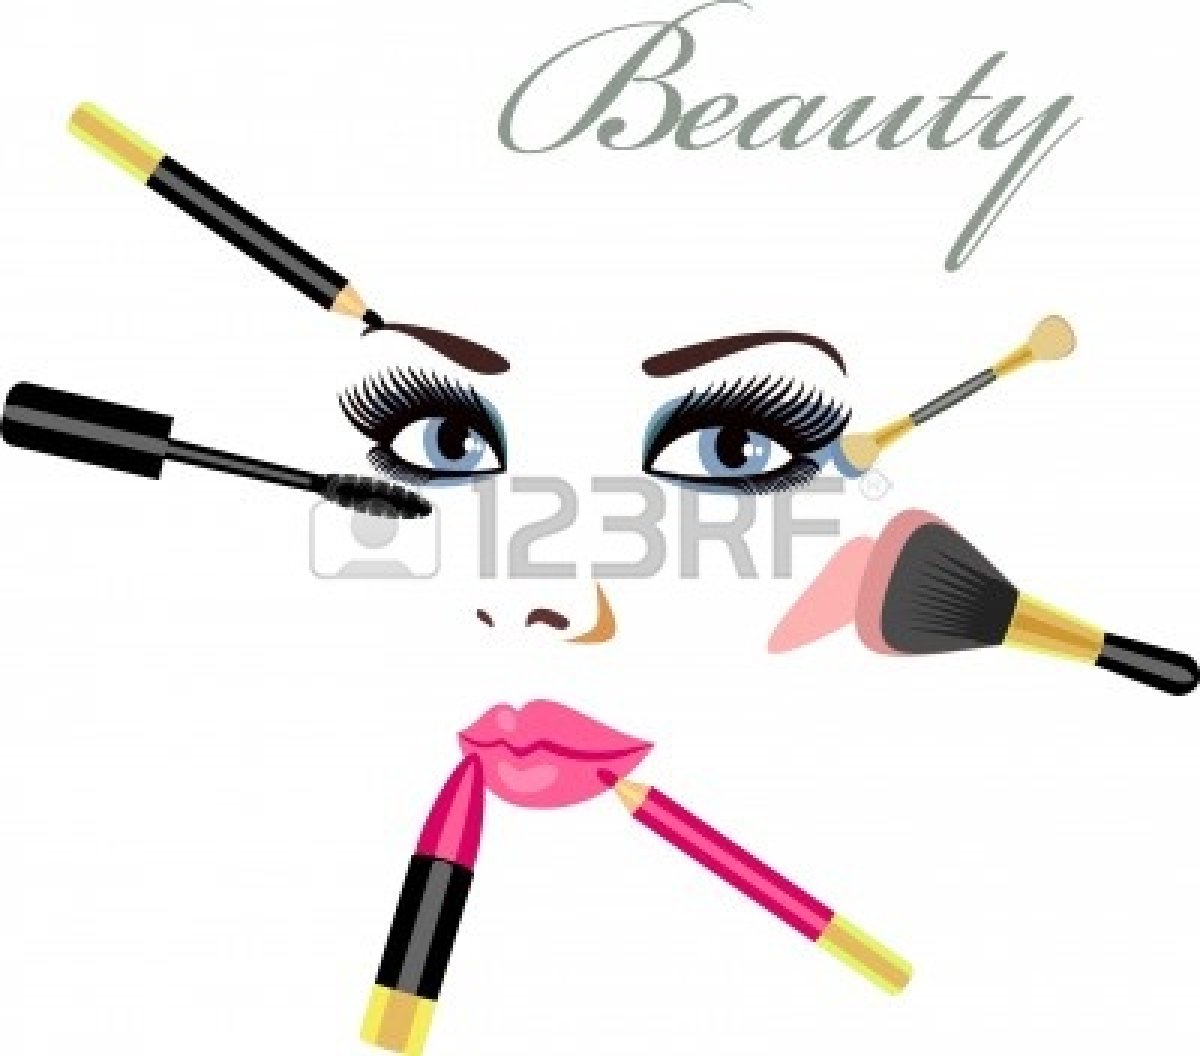 makeup clipart abstract